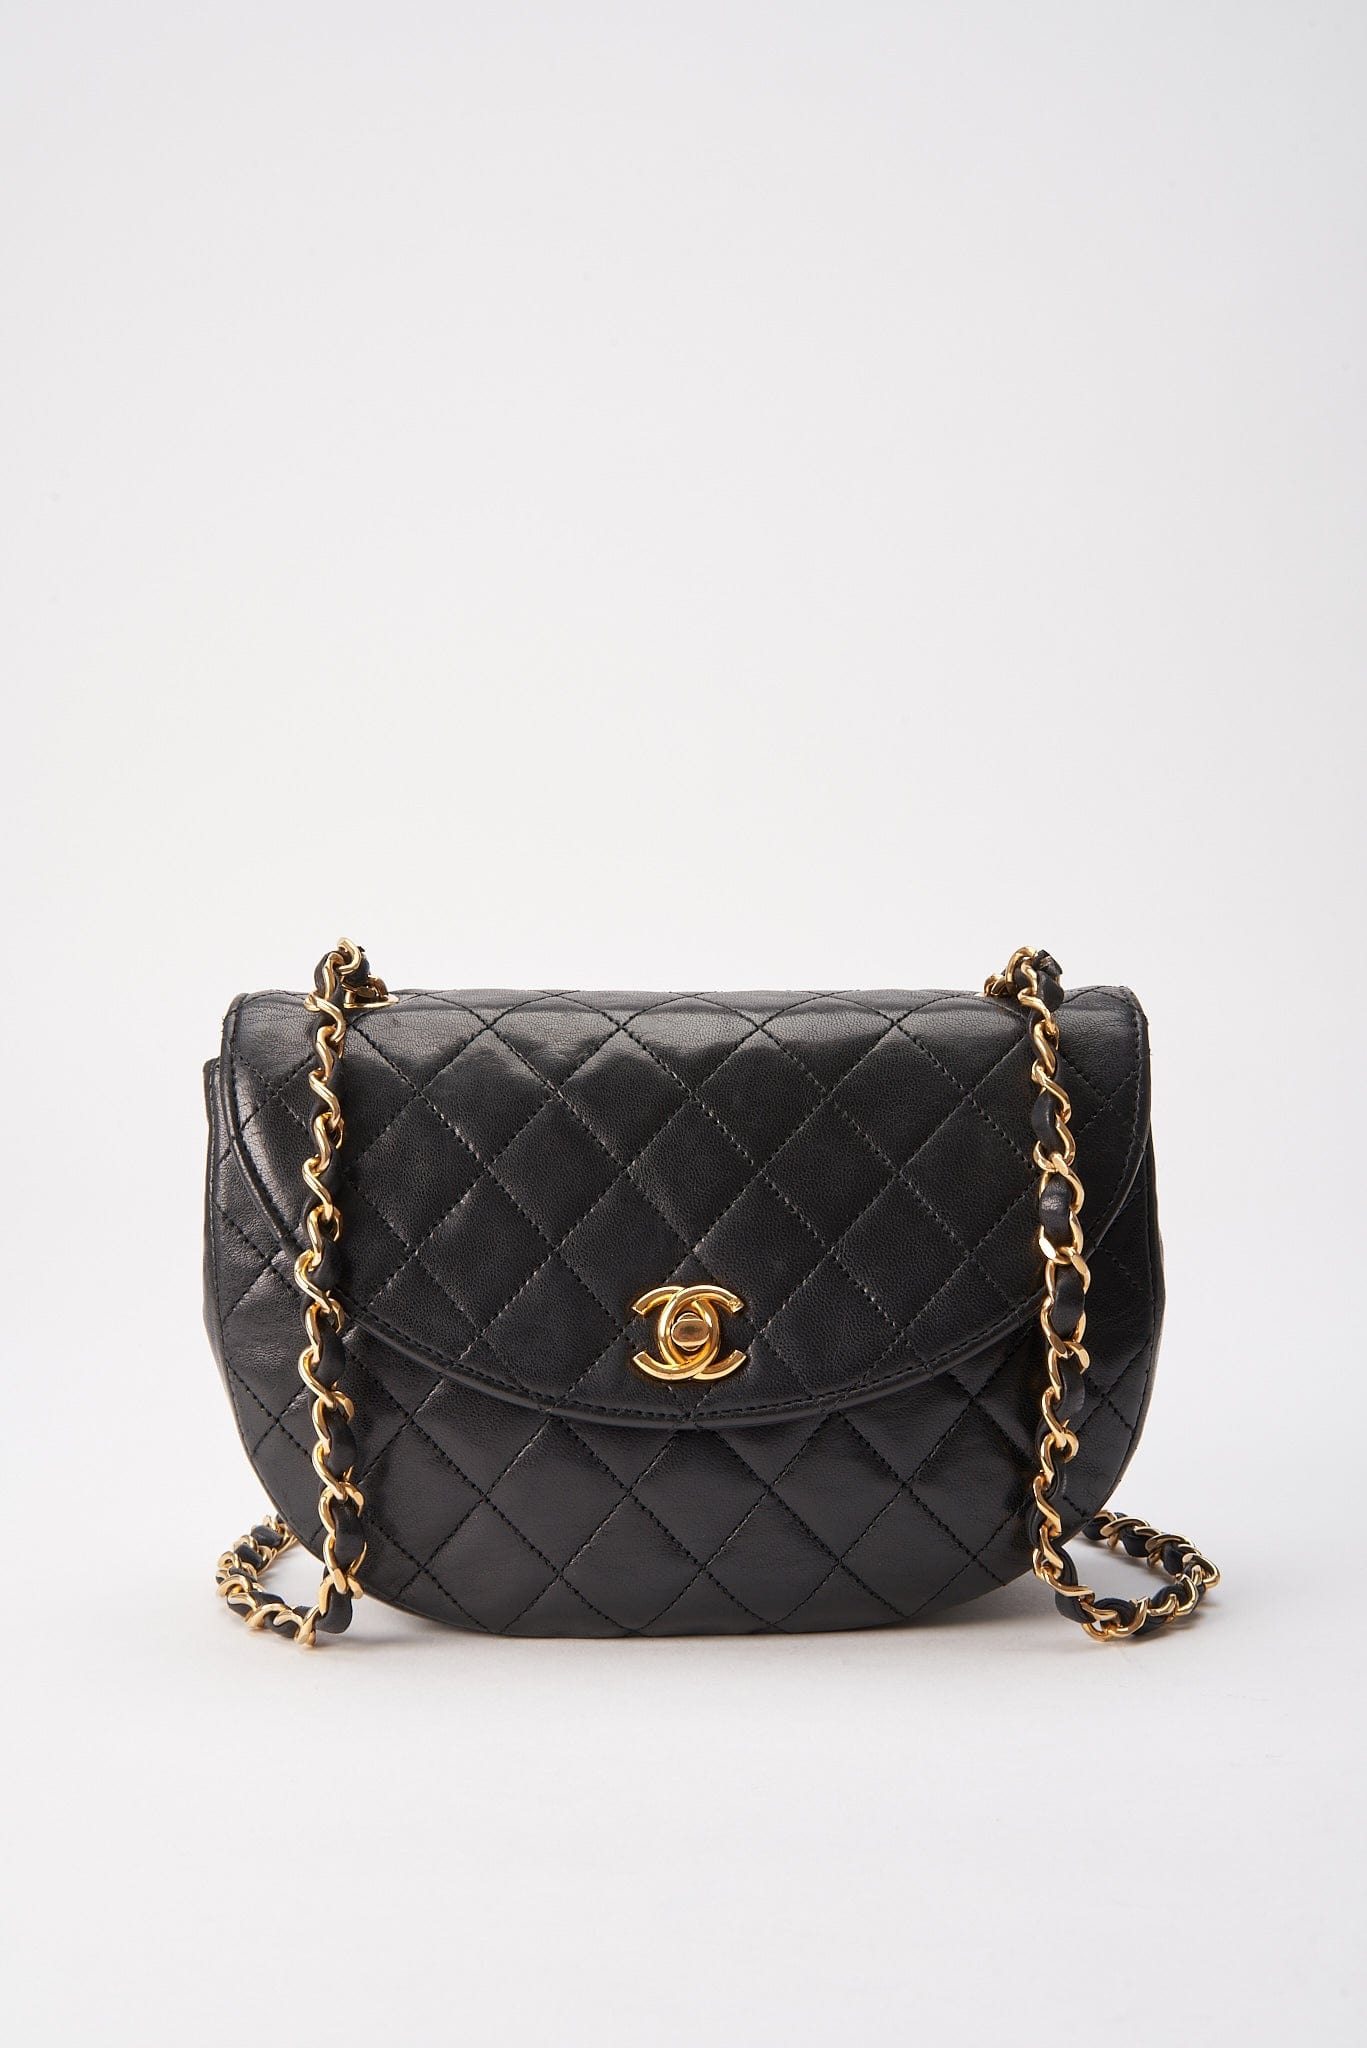 Vintage Chanel Black Half Moon Single Flap with 24k gold plated hardware